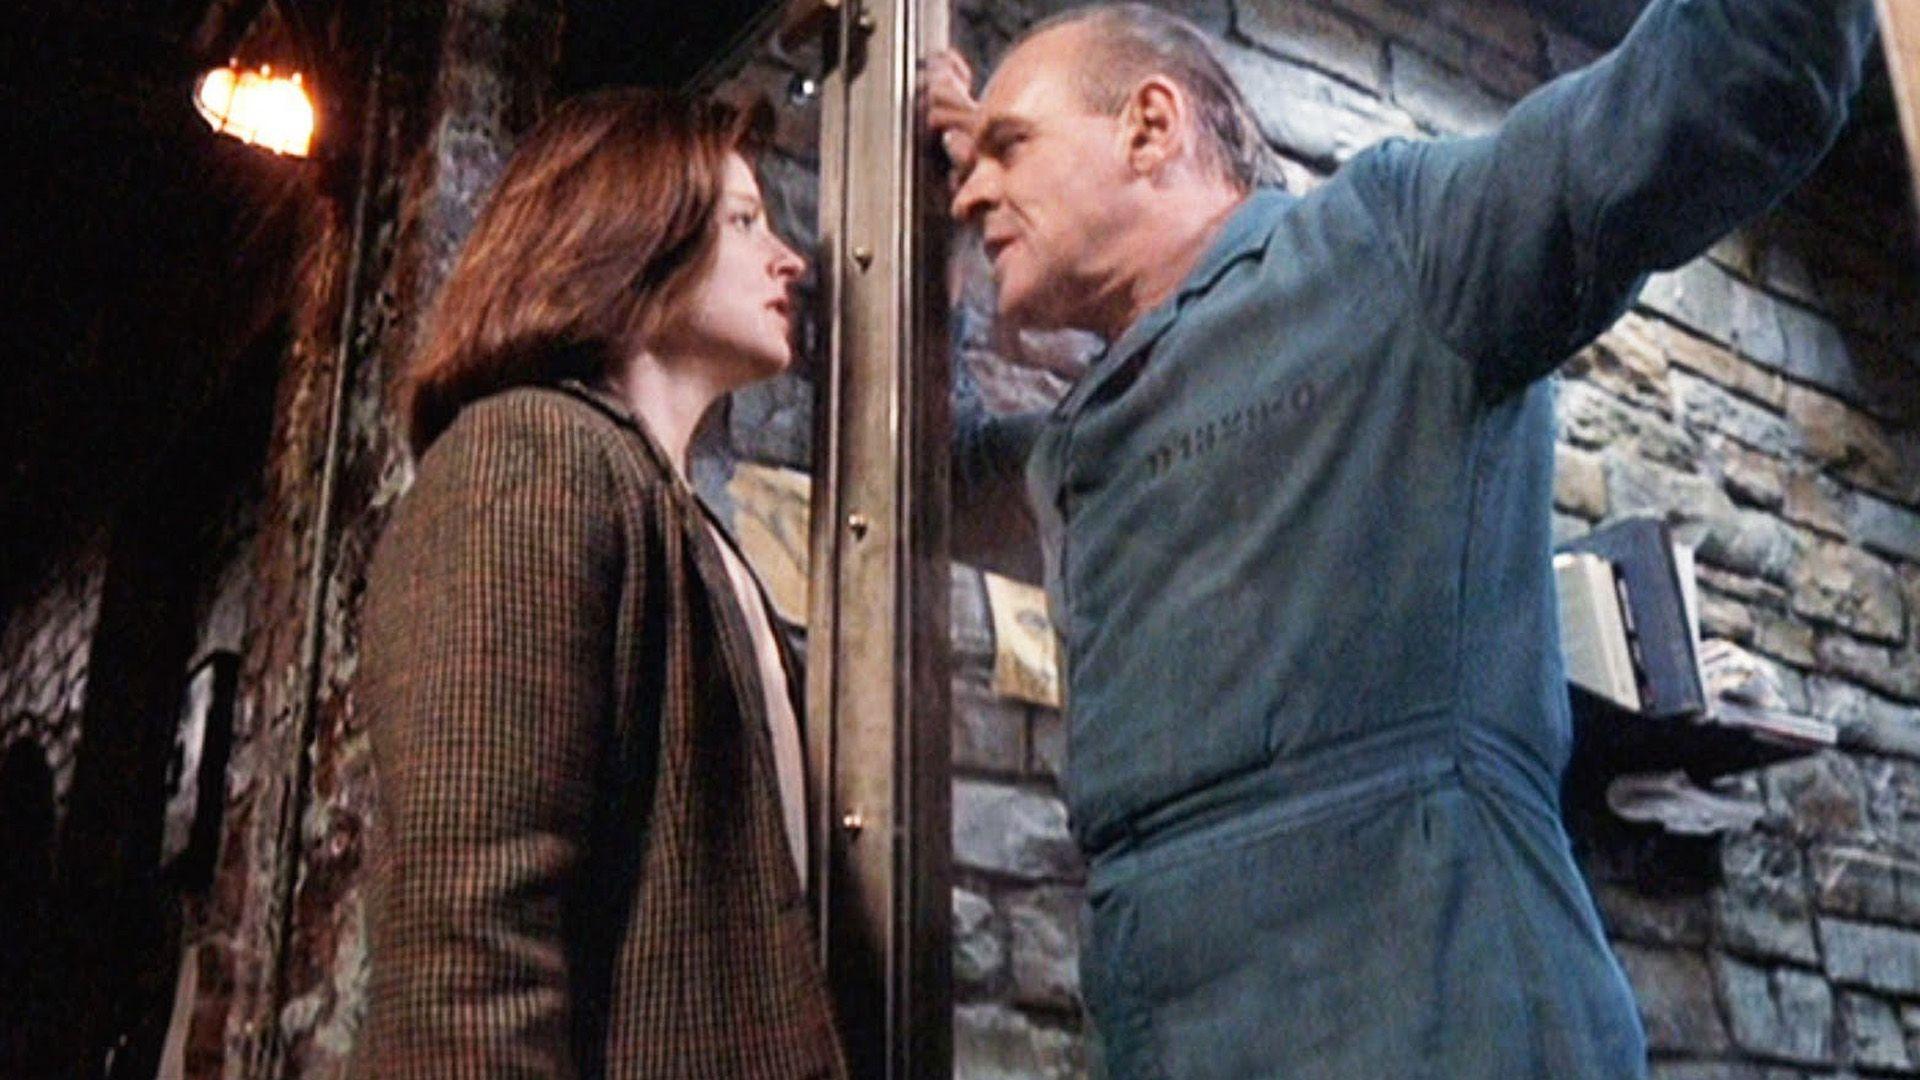 THE SILENCE OF THE LAMBS Recut as a Romantic Comedy